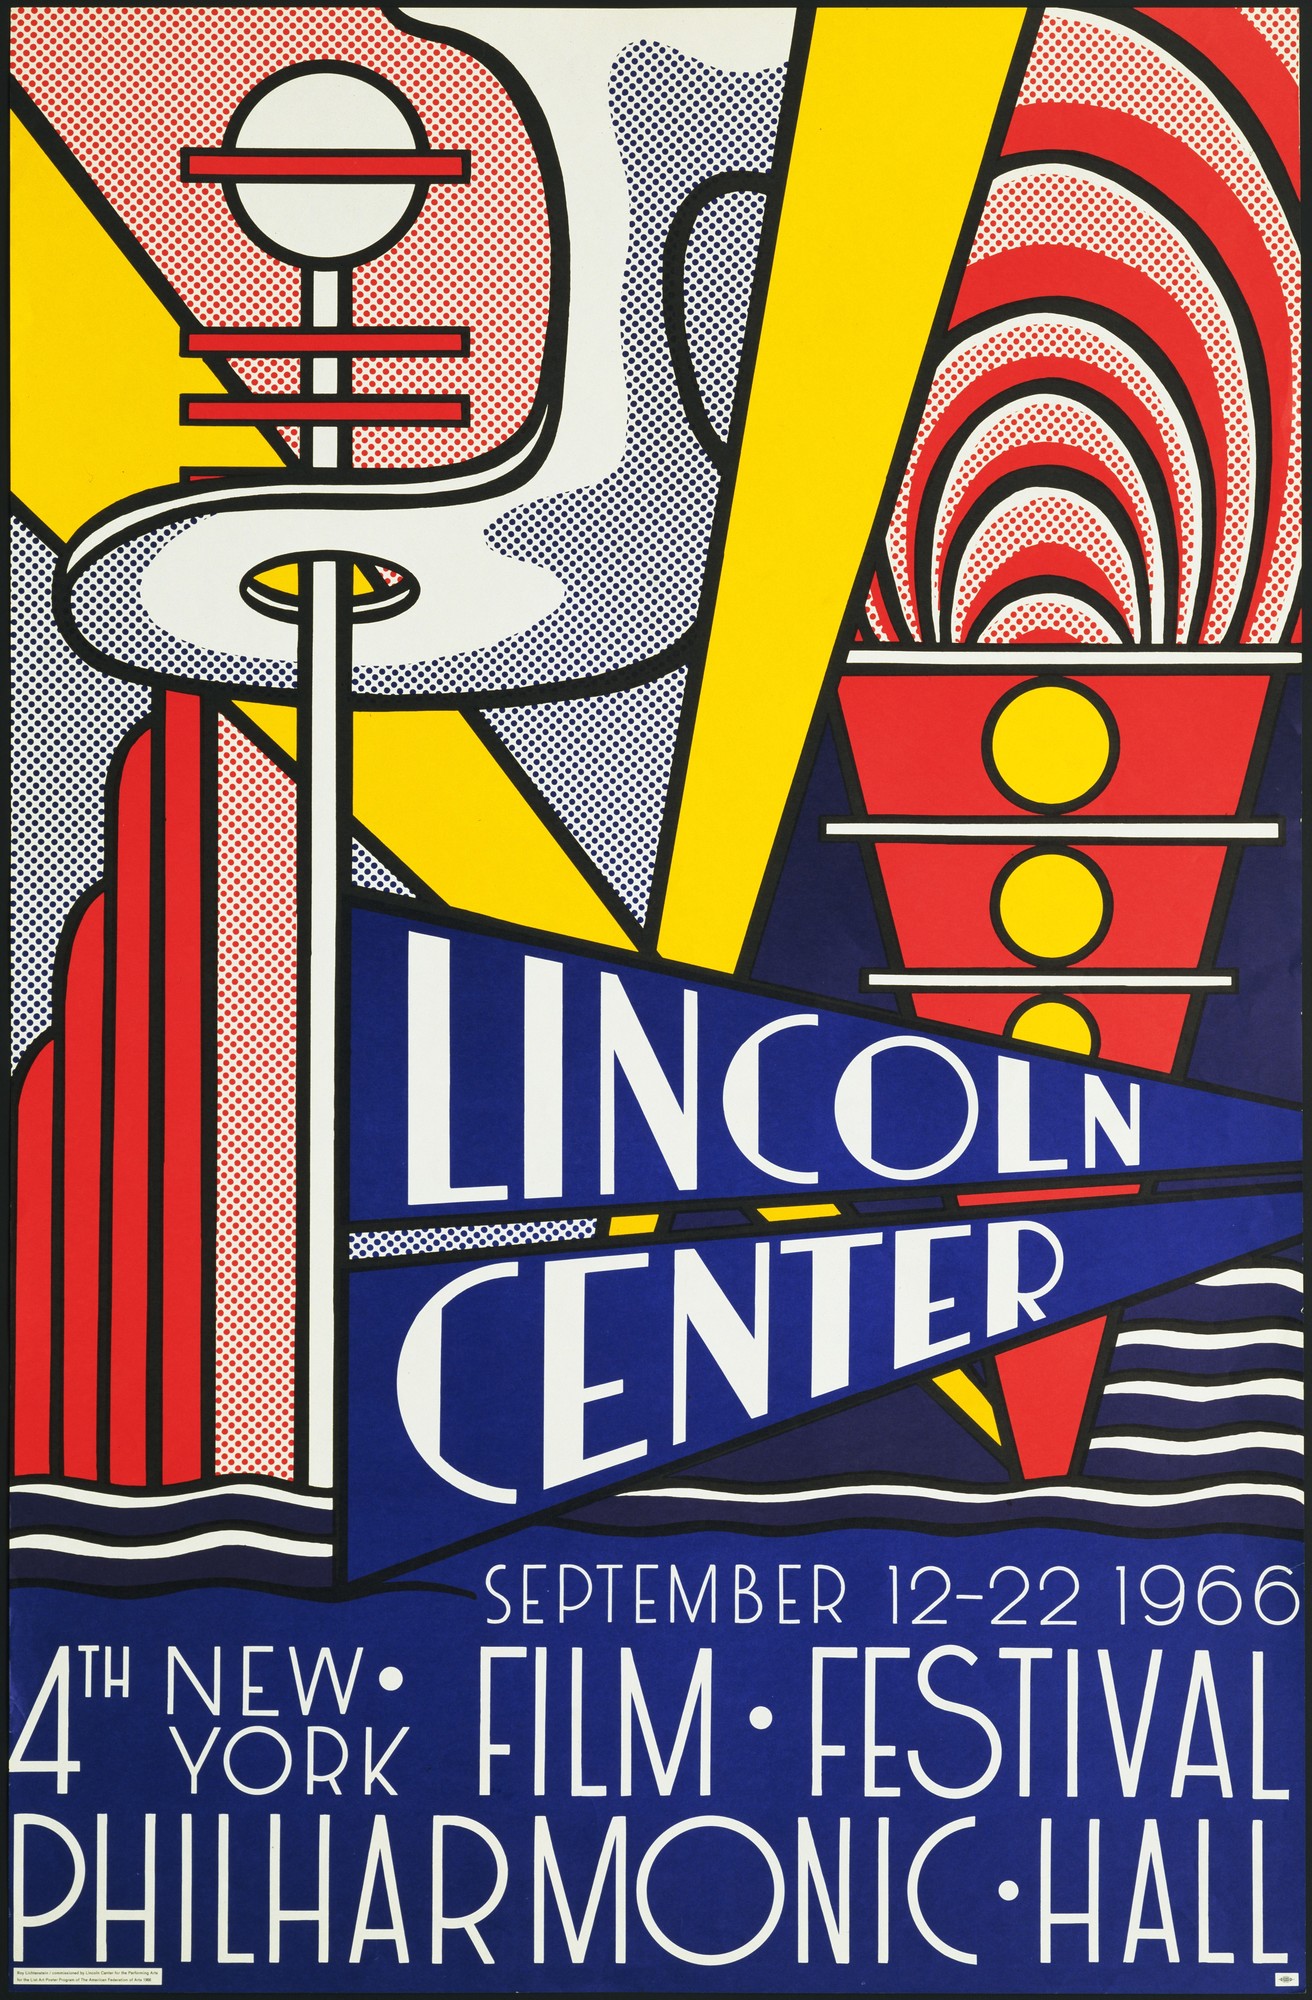 A poster unabashedly calling out Lincoln Center with banners, and city buildings with art deco styling and primary colors.